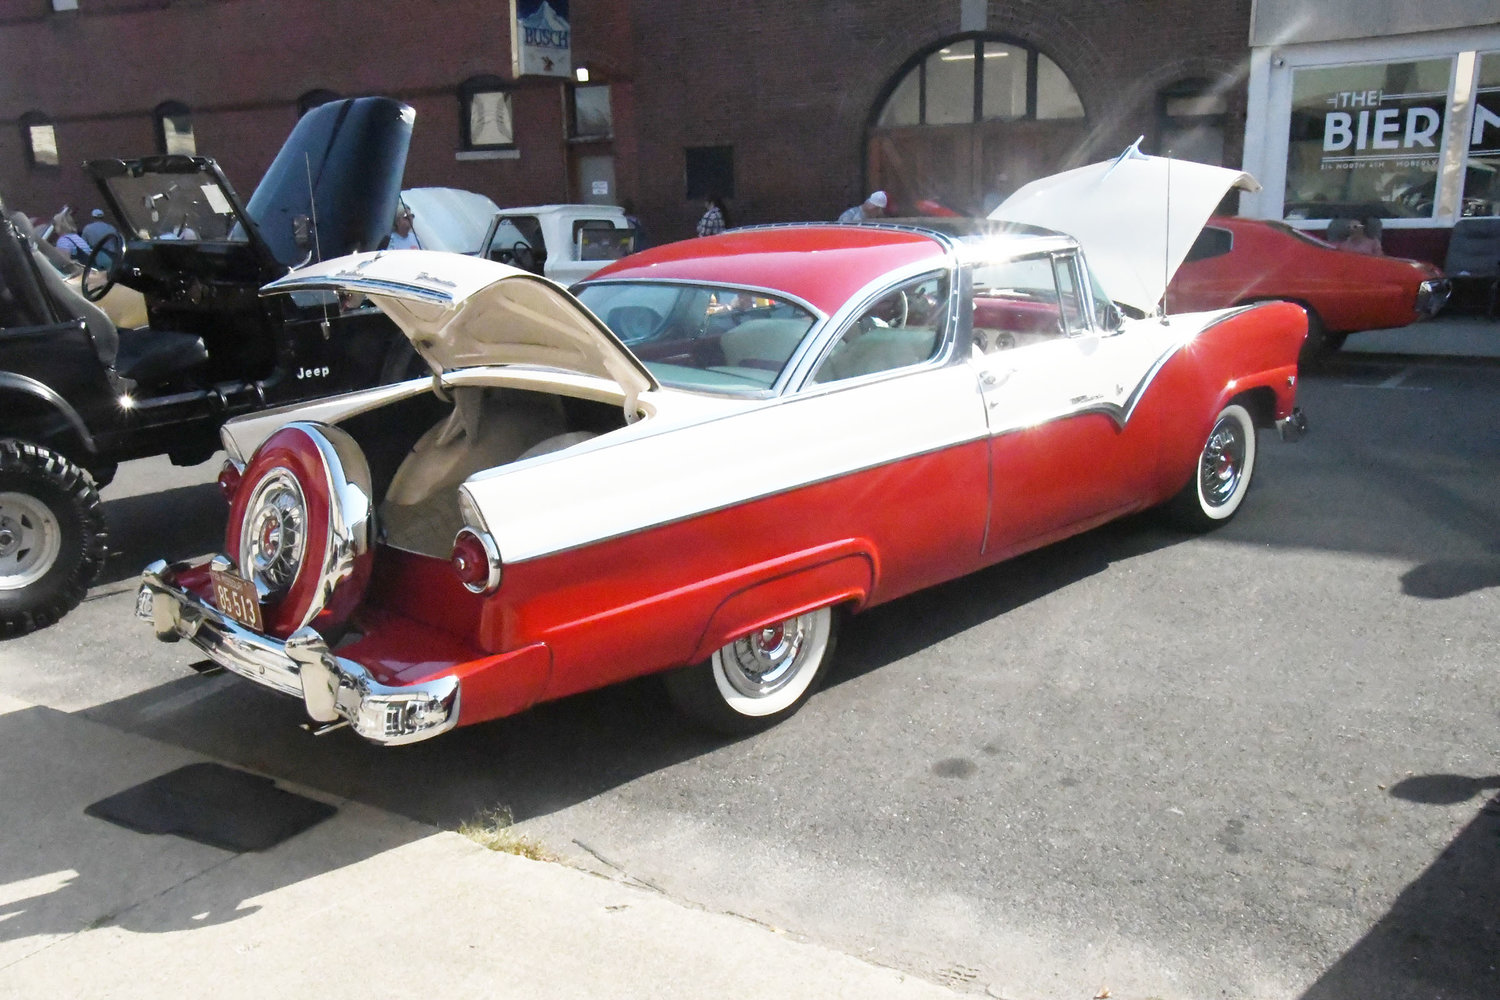 This 1955 Ford Crown Victoria Skyliner owned by Harvey Riley was one of the people's favorites.